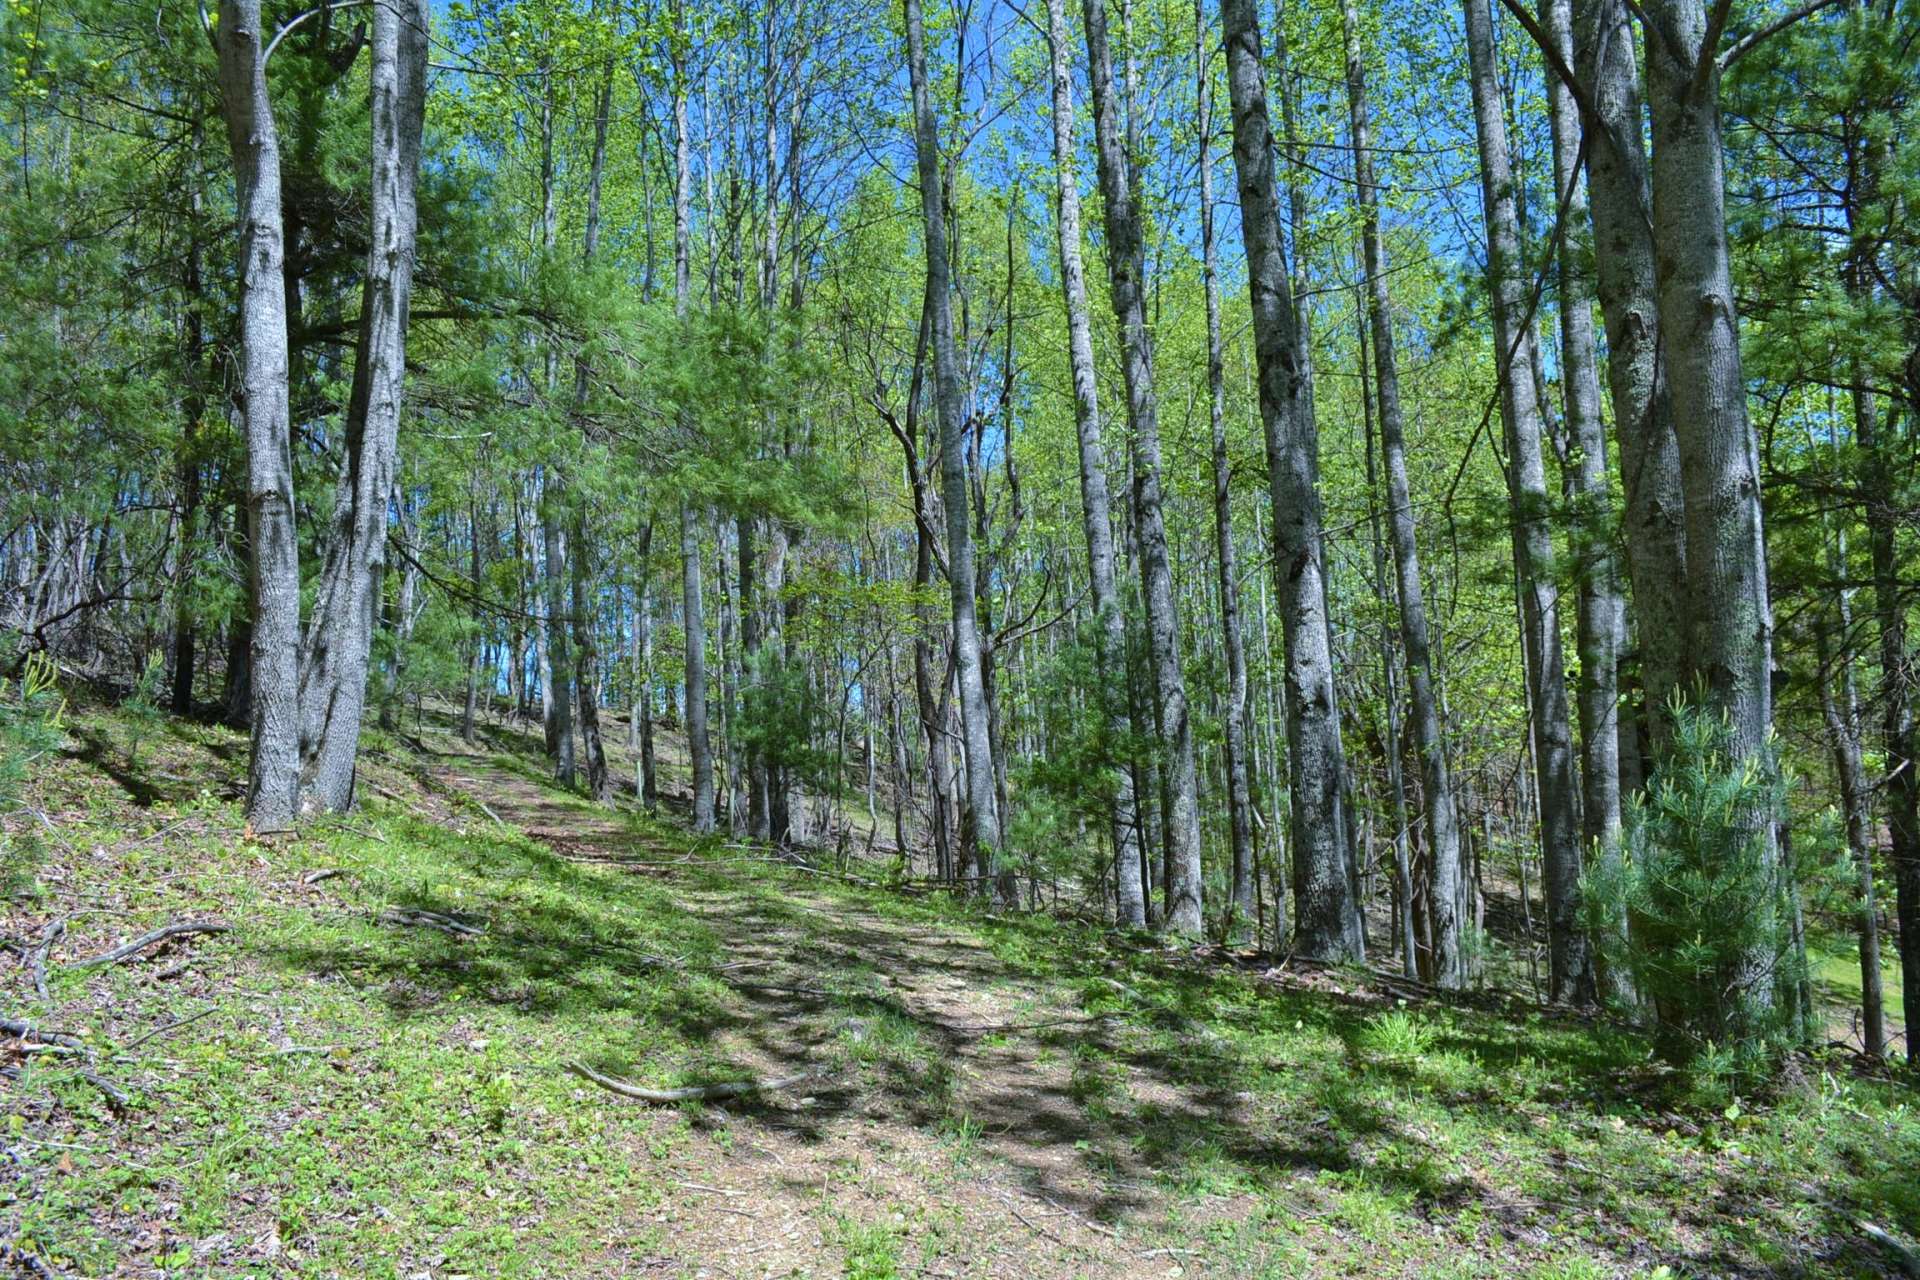 Lots of ATV, horseback trails, or hiking trails throughout the property allows for many recreational options.